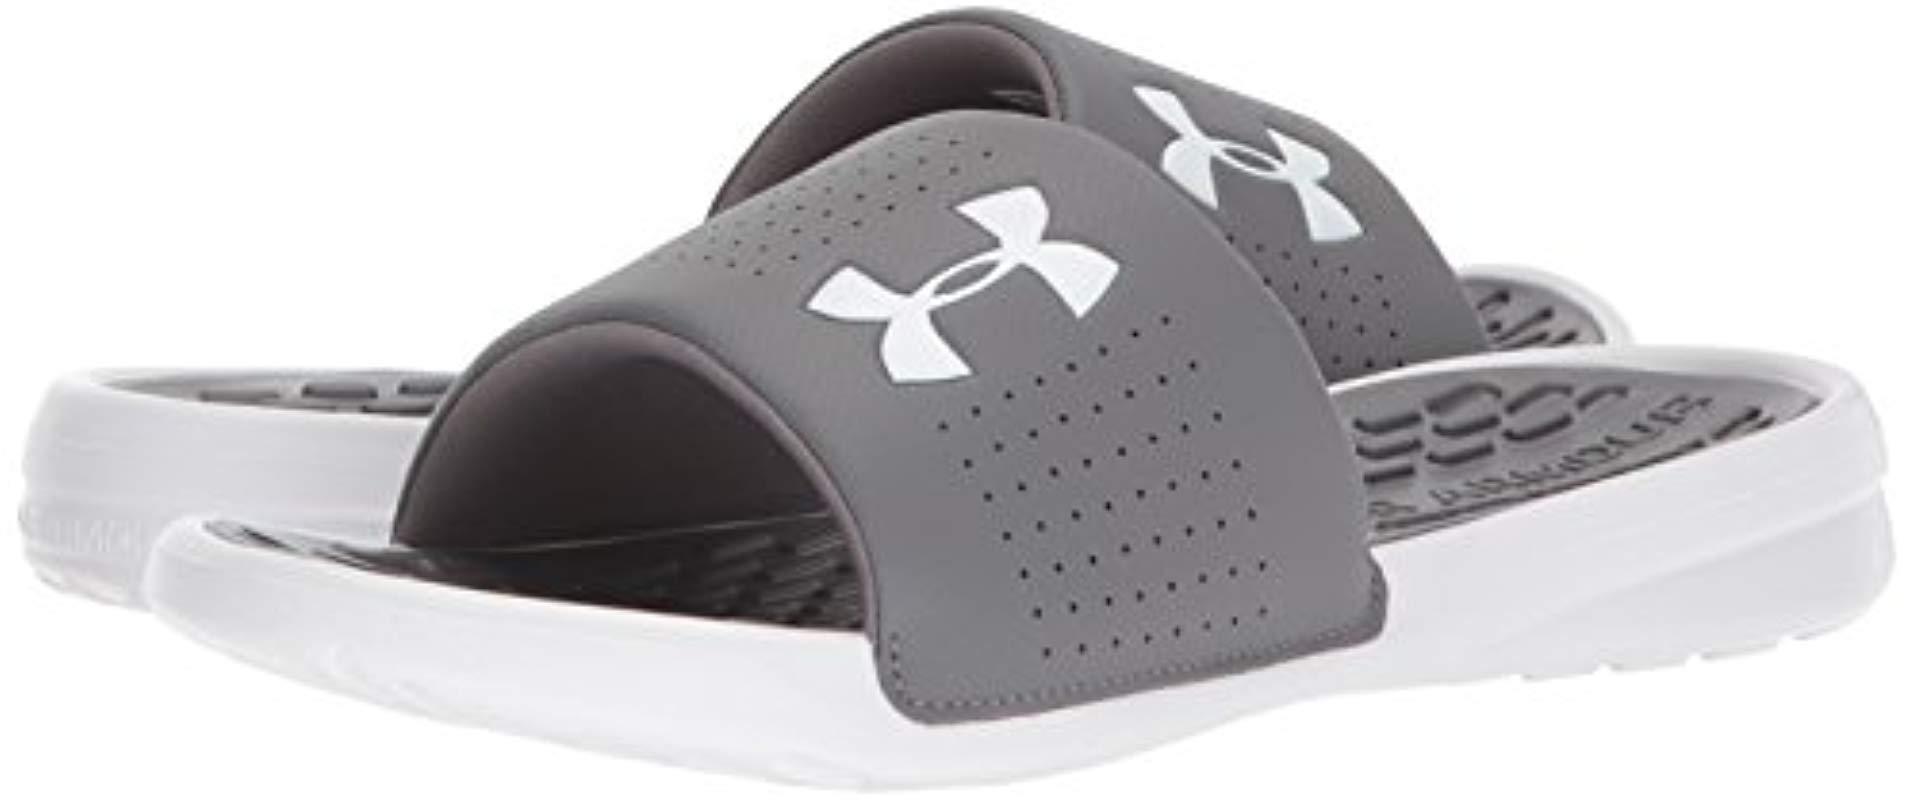 Under Armour Playmaker Fixed Strap Womens Sliders White 